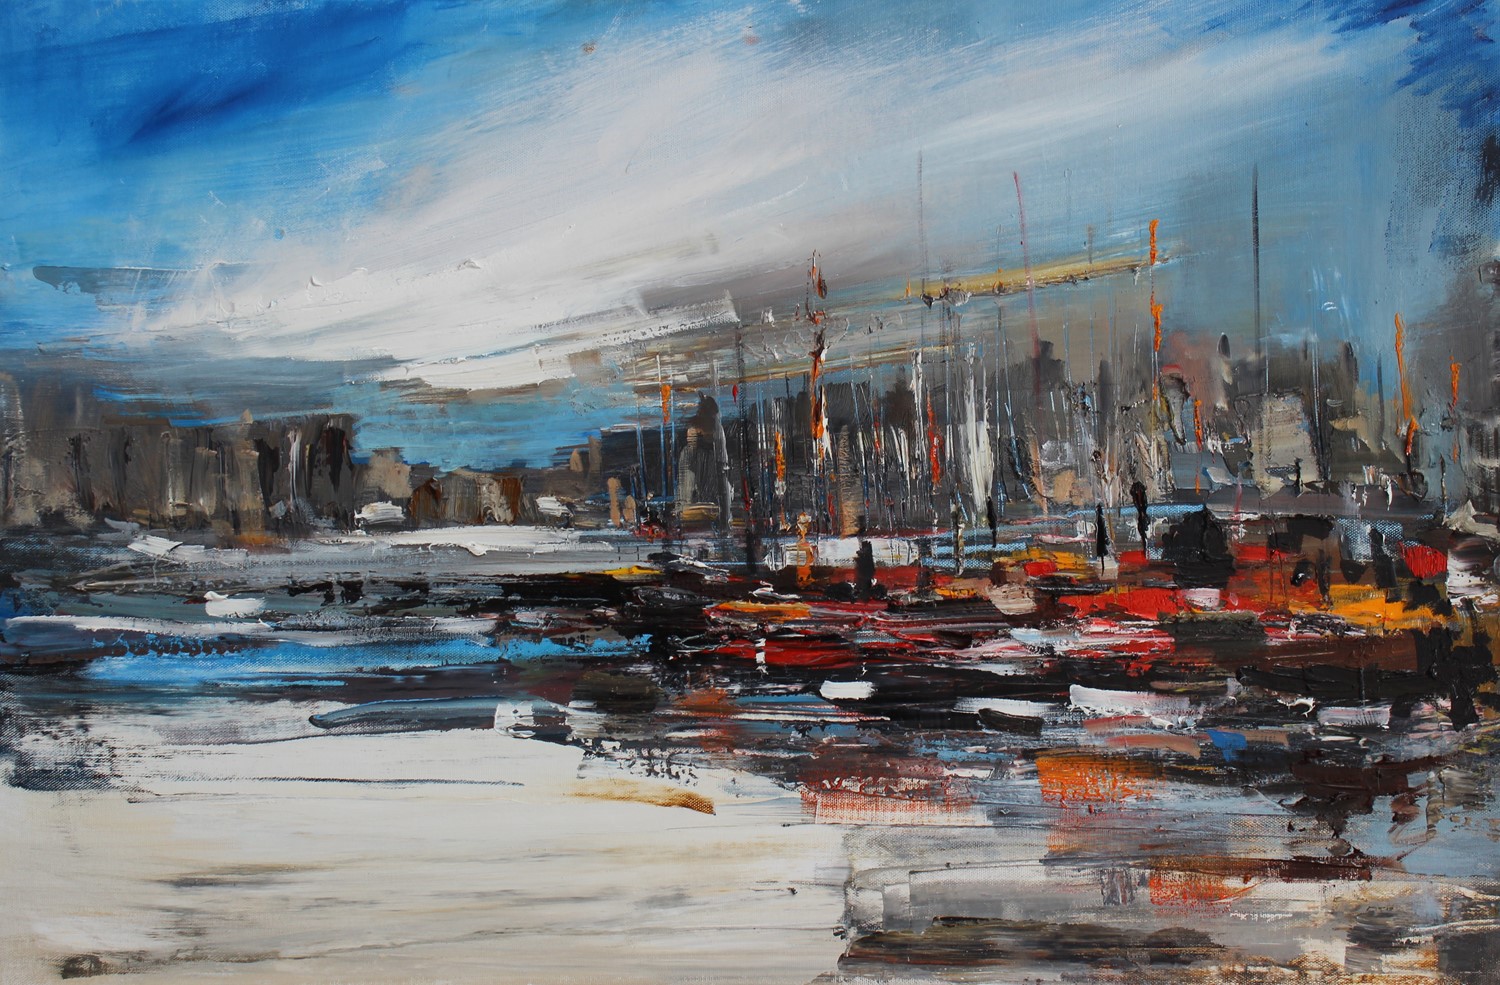 'Old Town Harbour' by artist Rosanne Barr